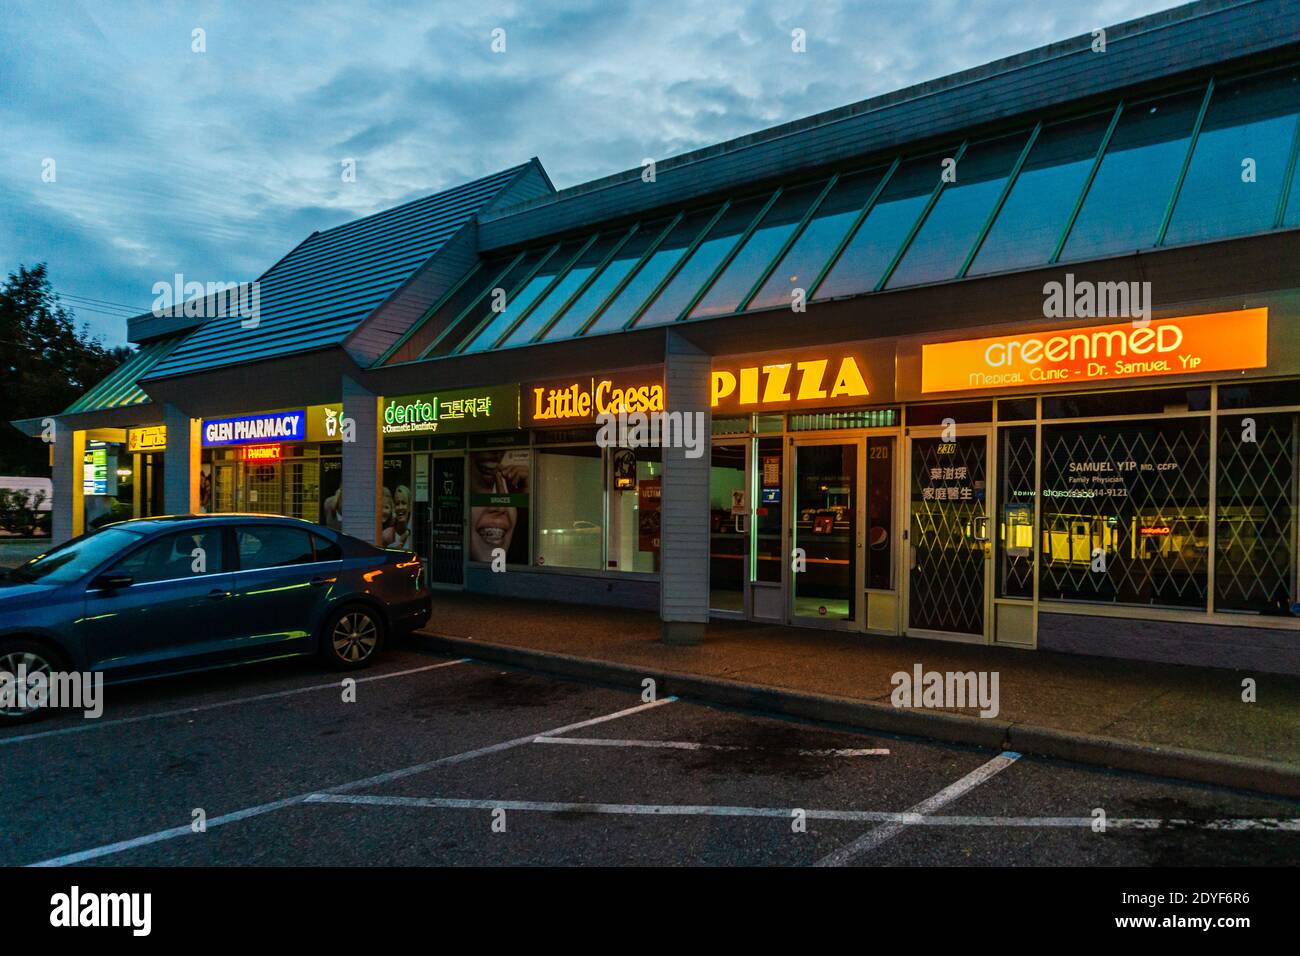 COQUITLAM, CANADA - OCTOBER 01, 2019: Little Caesar pizza and other stores Coquitlam Centre Shopping Mall. Stock Photo